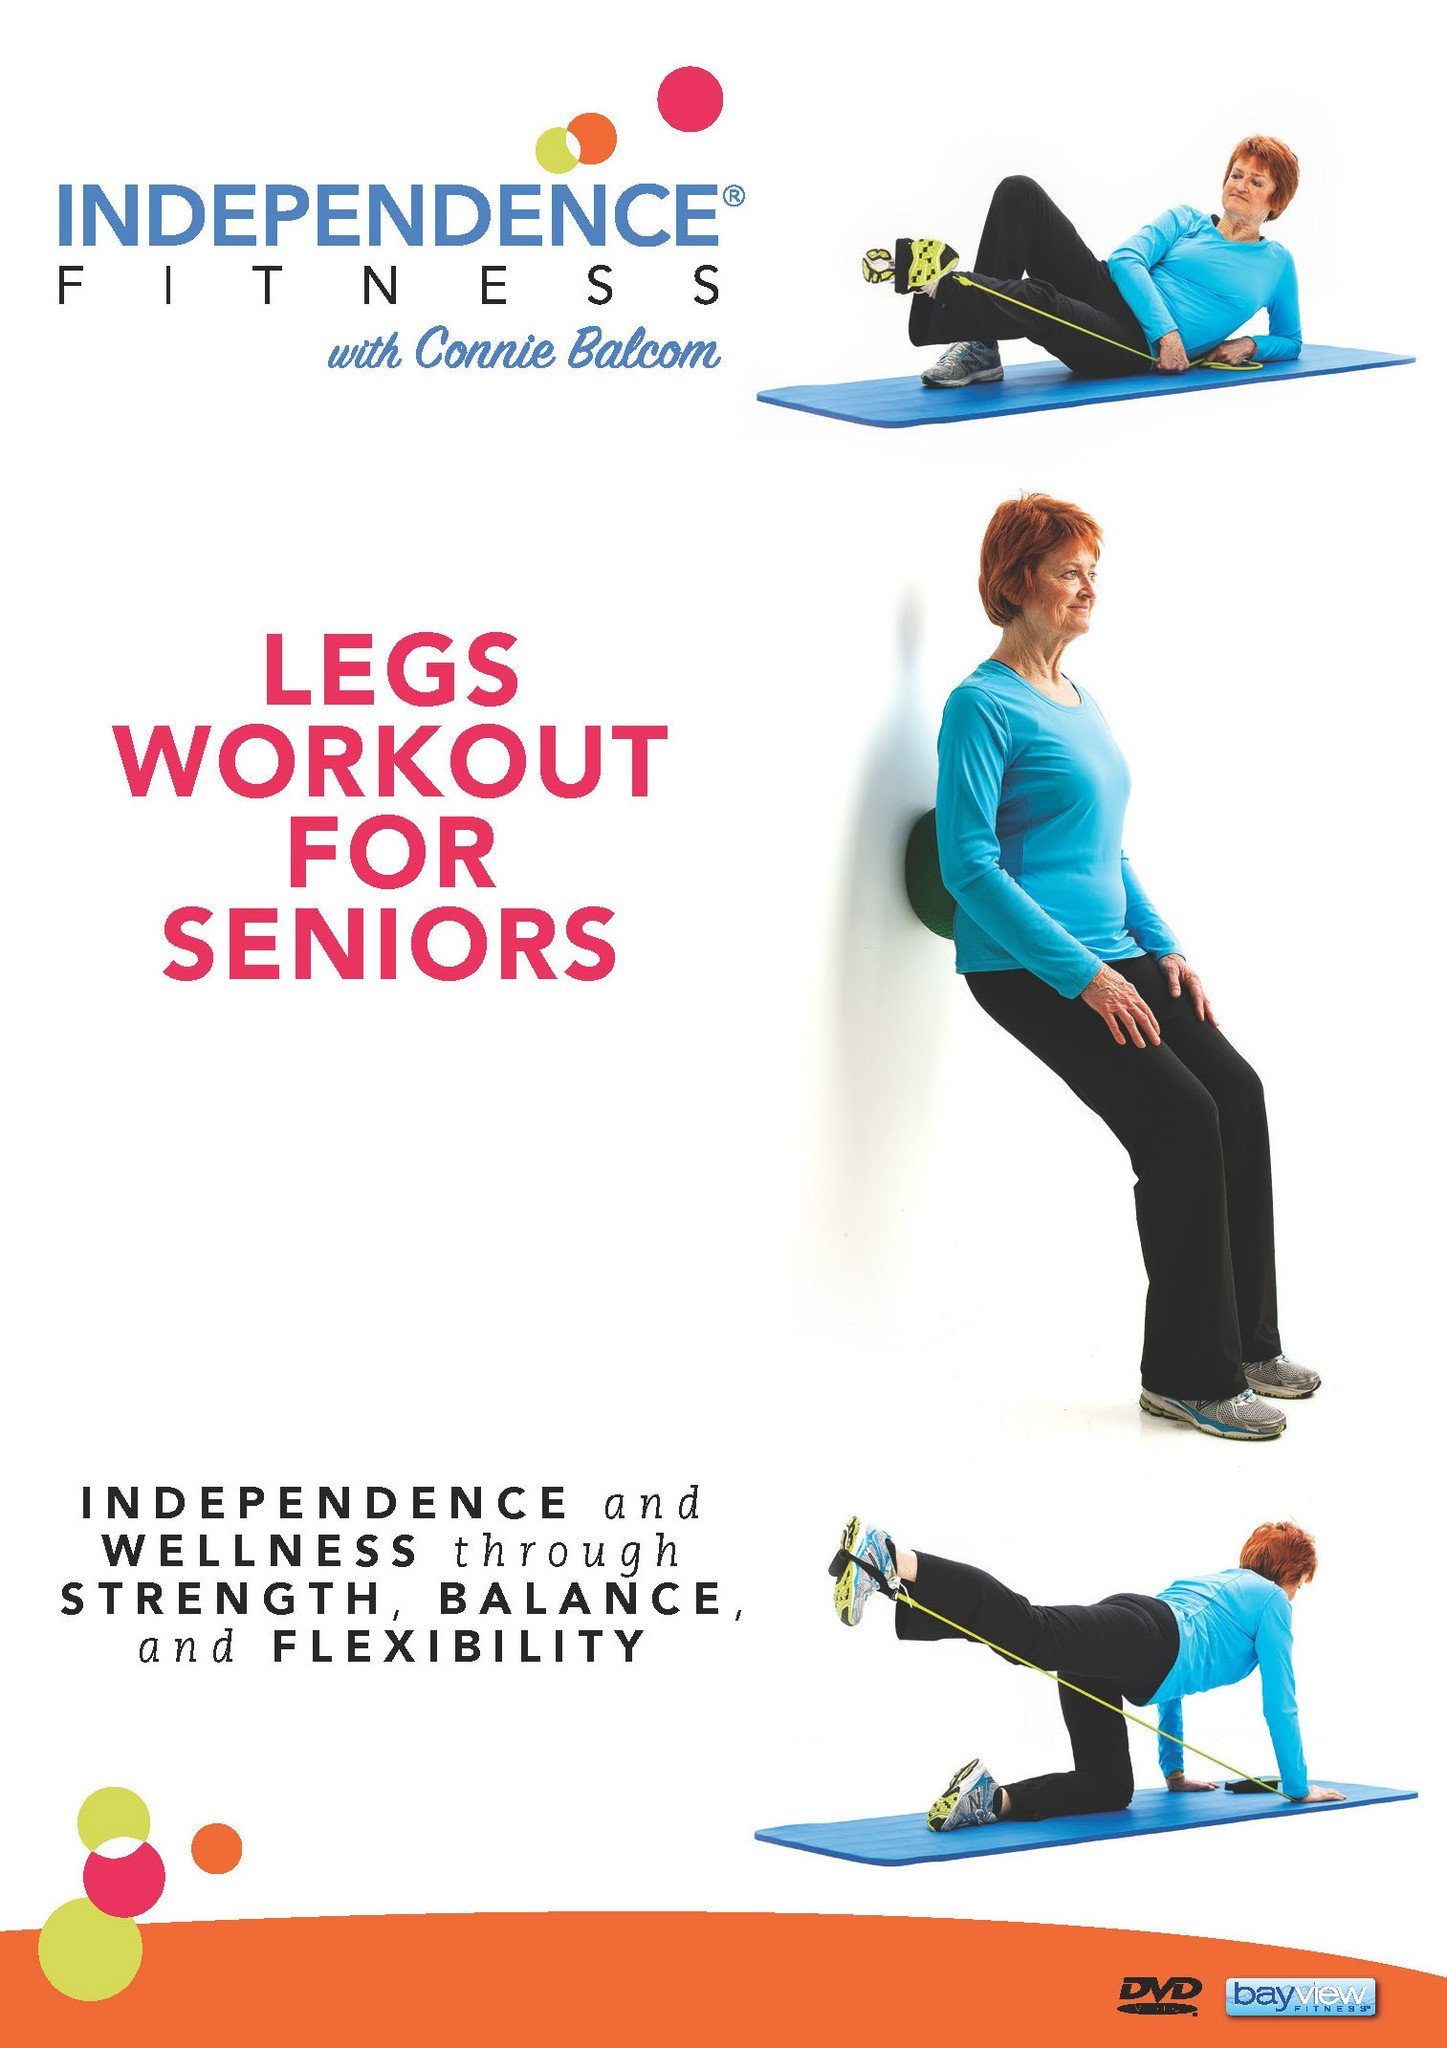 Simple Exercises & Strength Workout Programs for Seniors & Elderly Adults